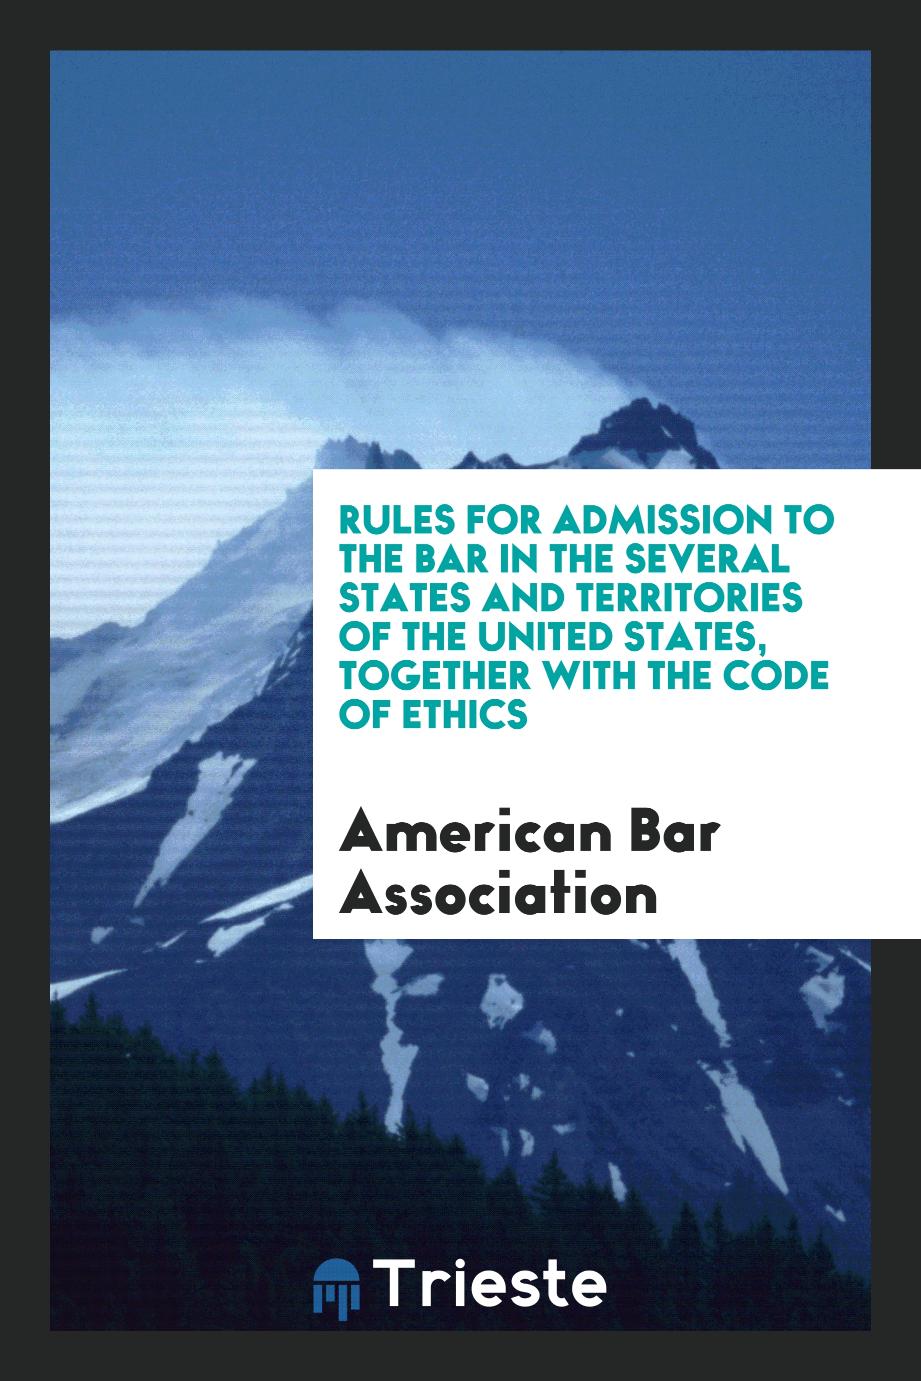 Rules for Admission to the Bar in the Several States and Territories of the United States, Together with the Code of Ethics